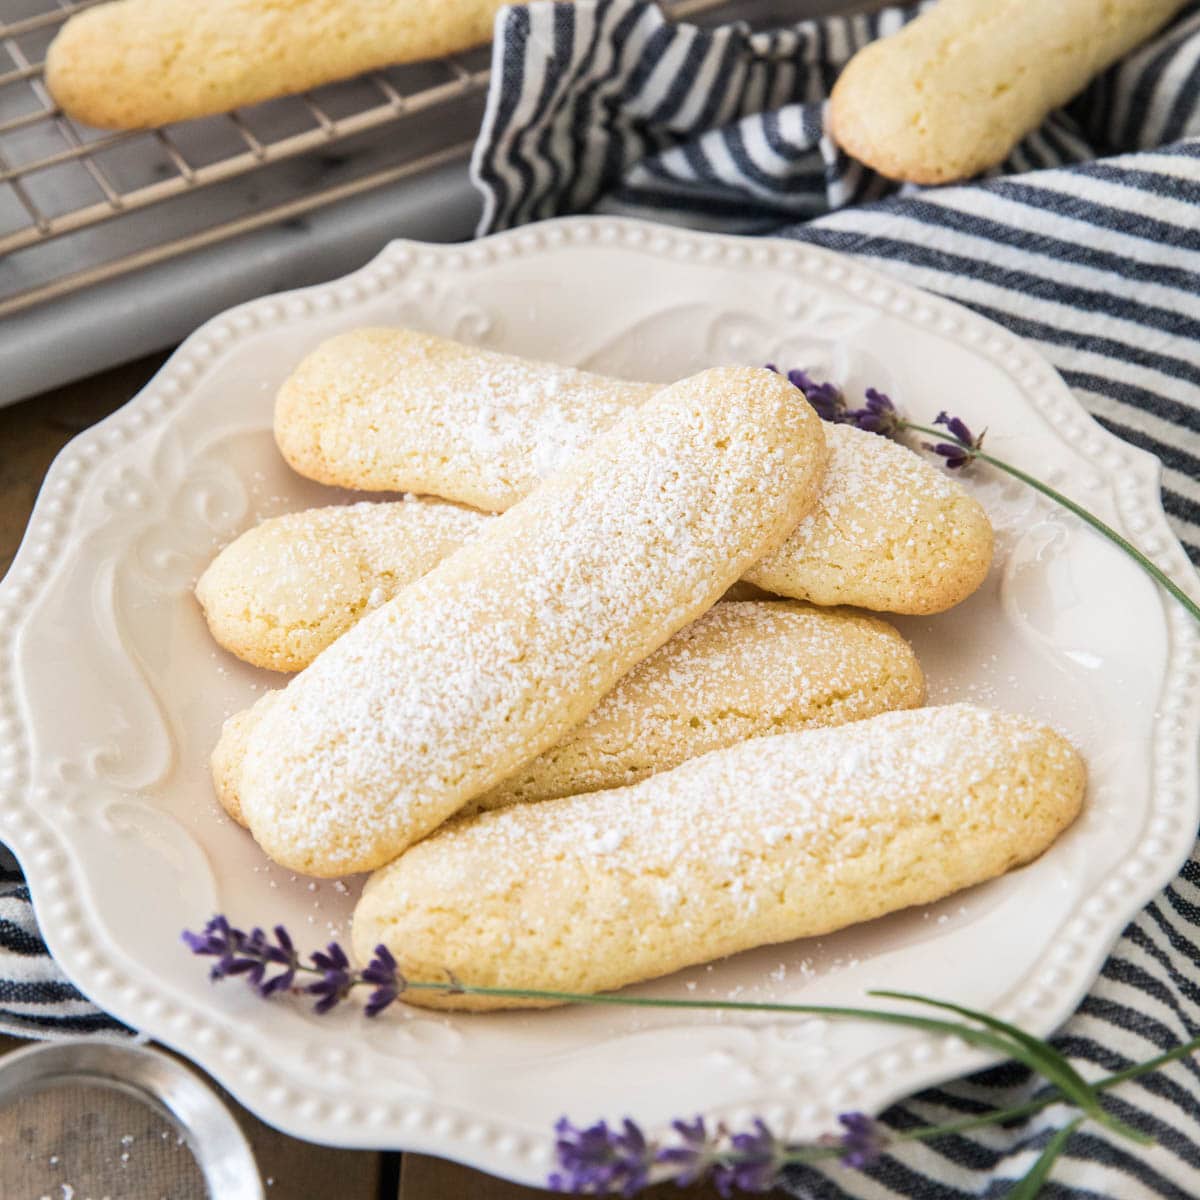 Top 3 Lady Fingers Recipes